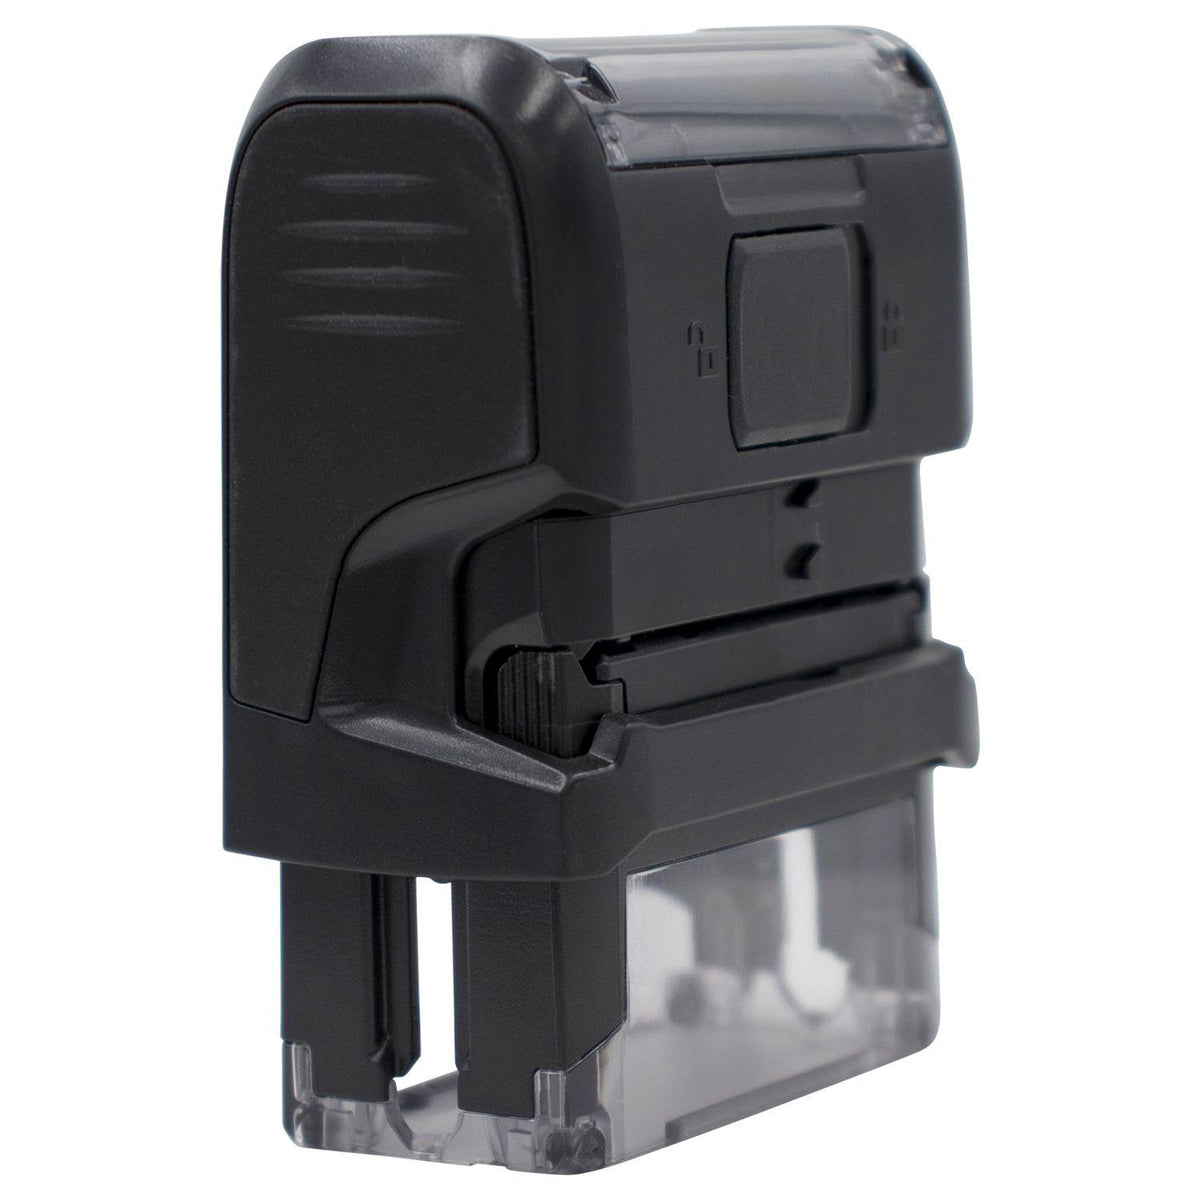 Self-Inking Importante Stamp - Engineer Seal Stamps - Brand_Trodat, Impression Size_Small, Stamp Type_Self-Inking Stamp, Type of Use_Business, Type of Use_General, Type of Use_Office